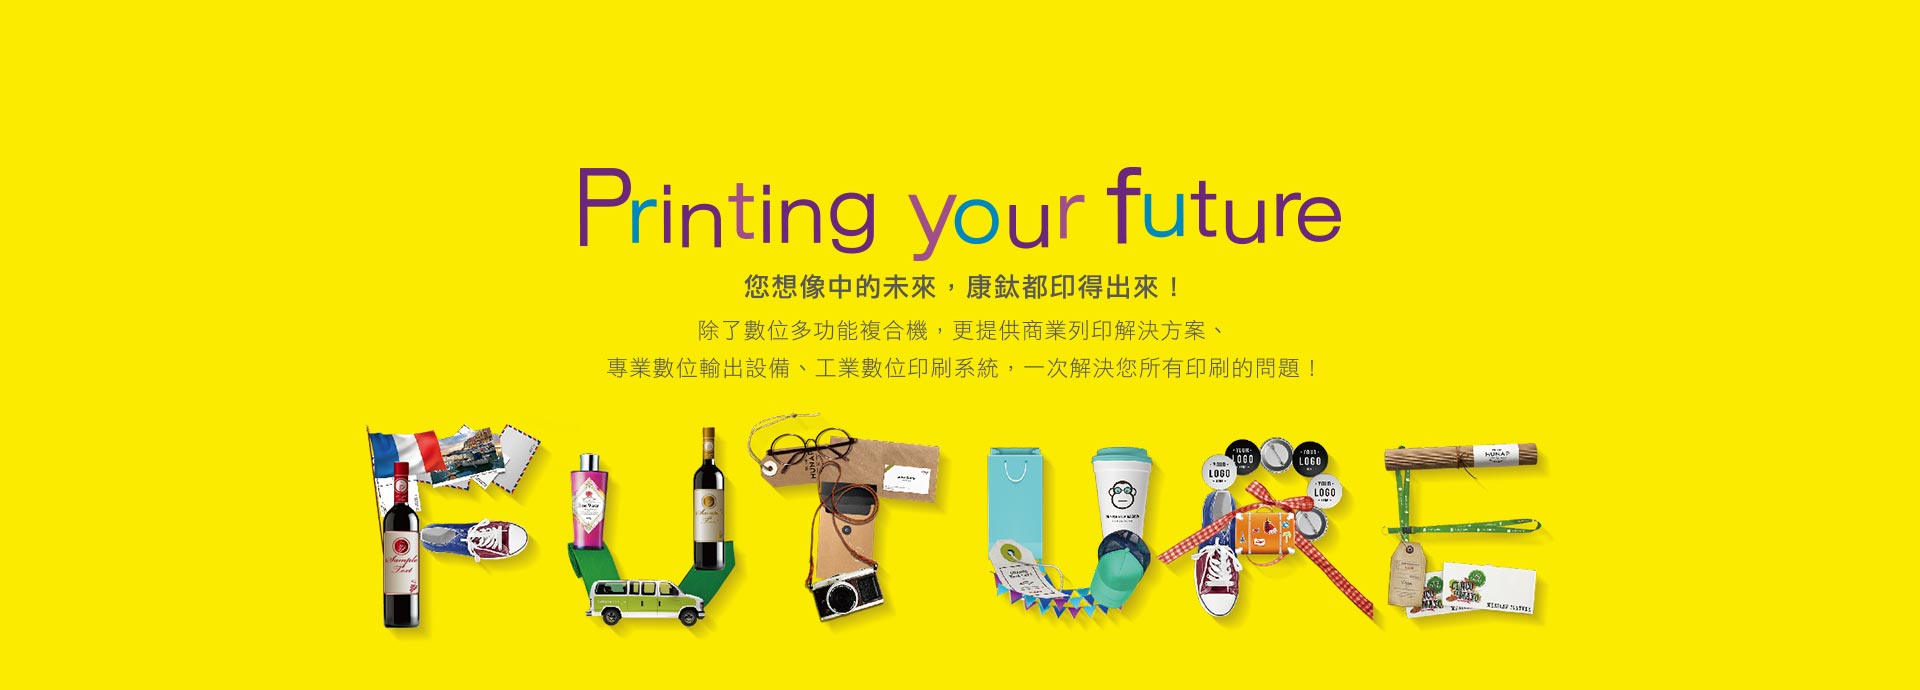 printing your future